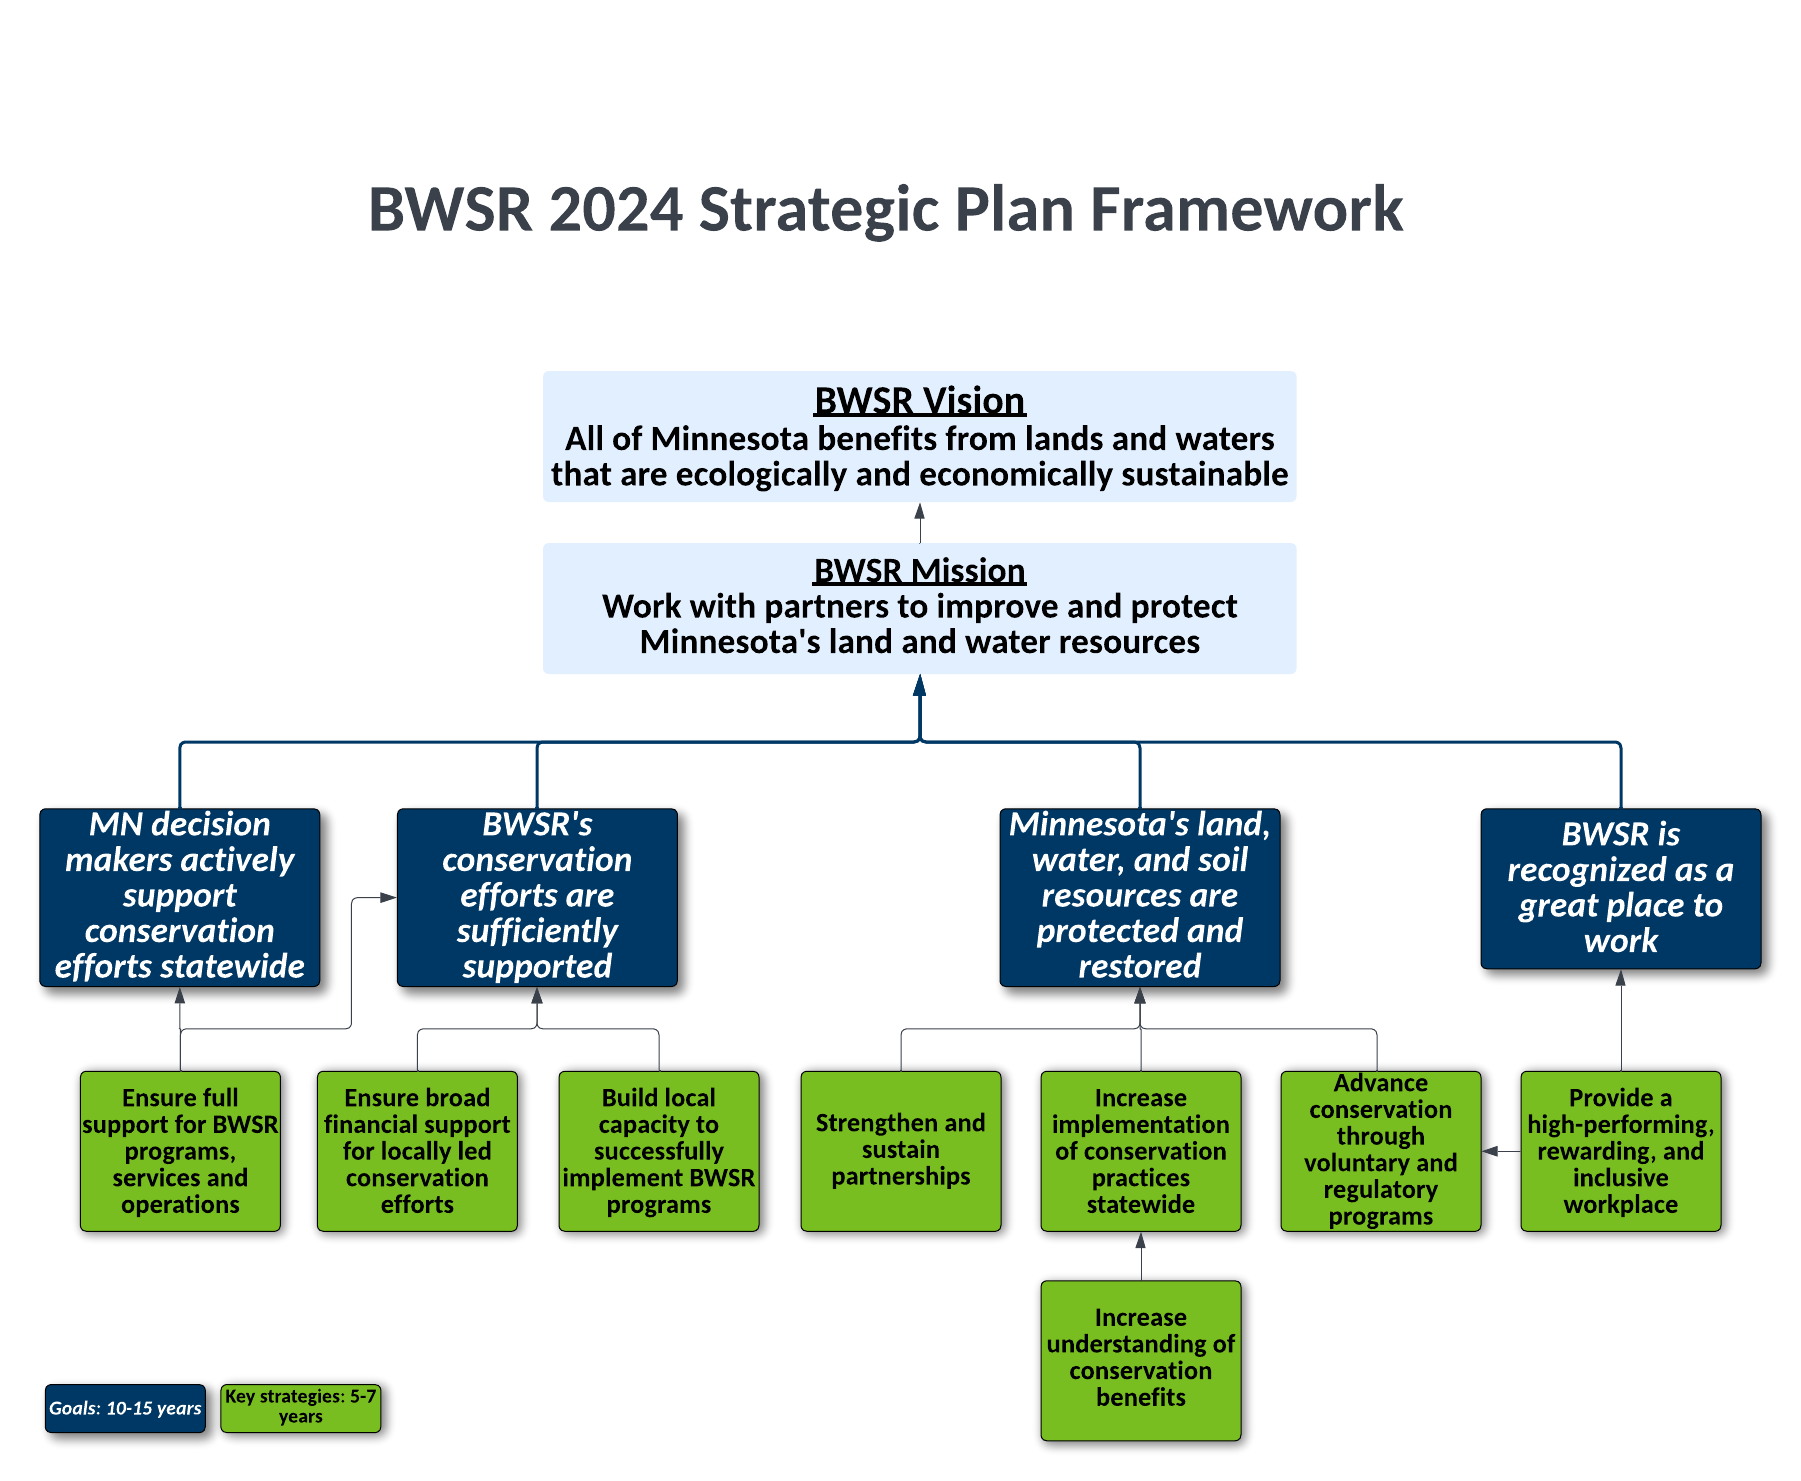 flow chart showing the BWSR Mission Vision and key goals and strategies